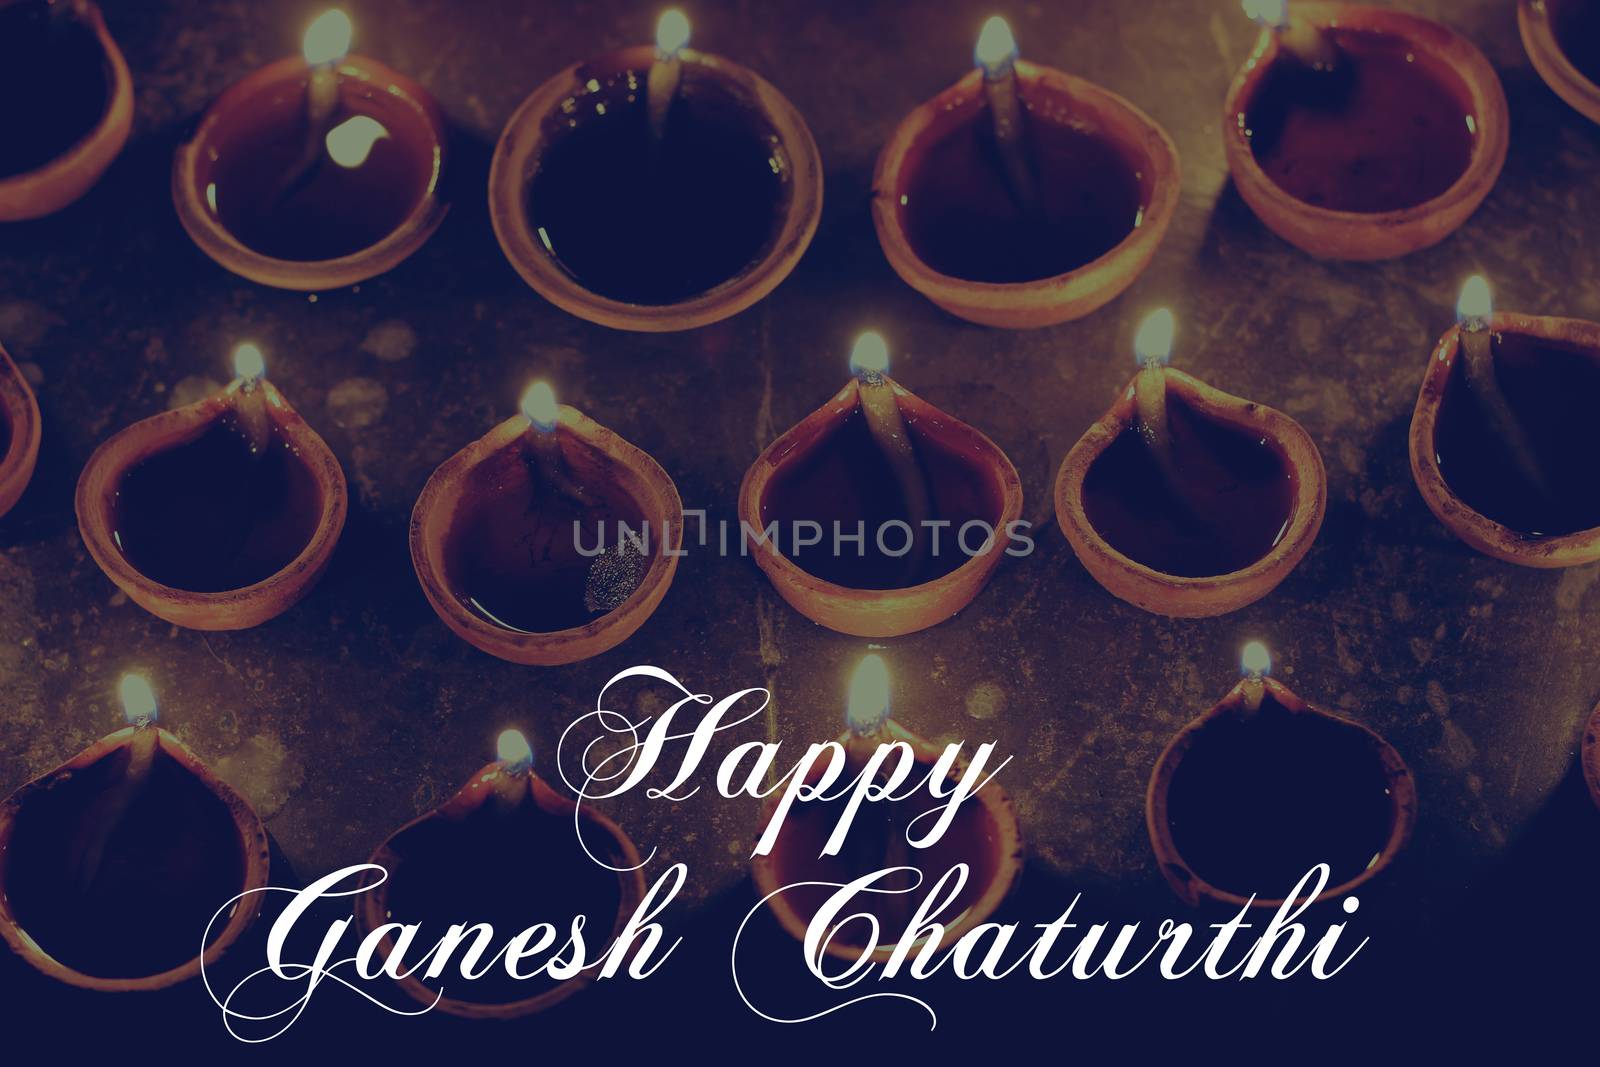 happy ganesh chaturthi text with oil lamps, festival celebration, retro effect